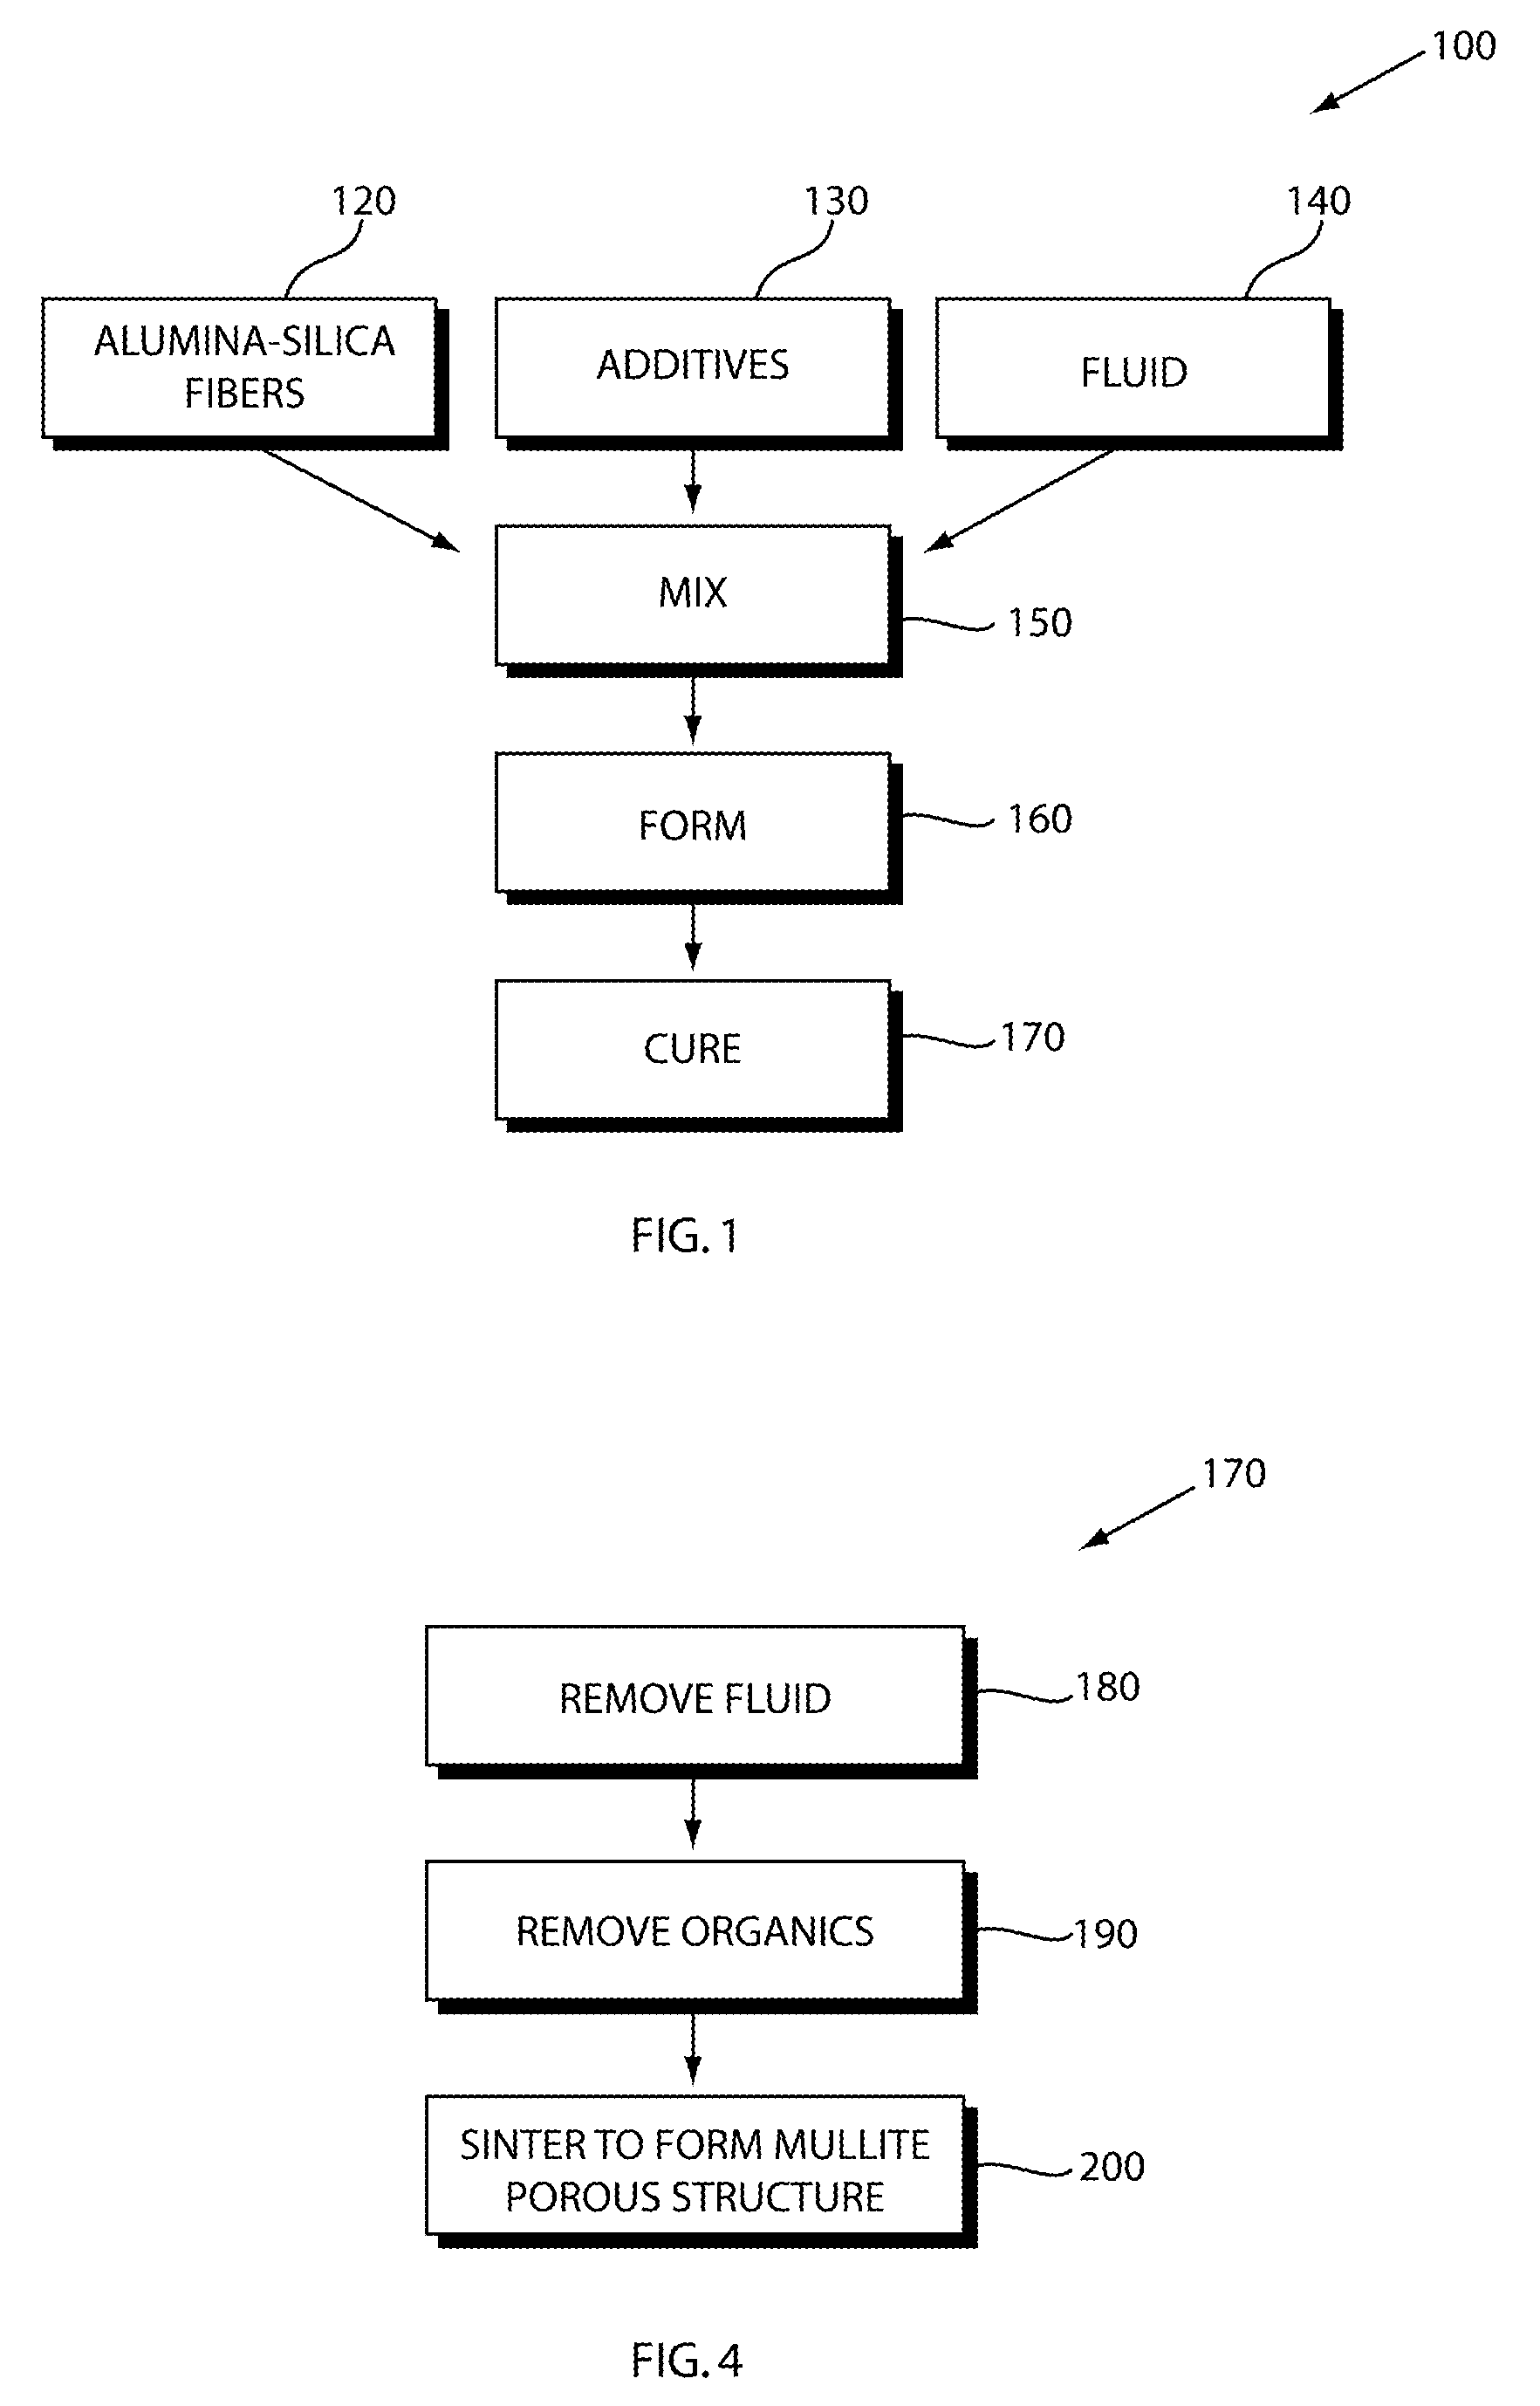 Fiber-Based Ceramic Substrate and Method of Fabricating the Same